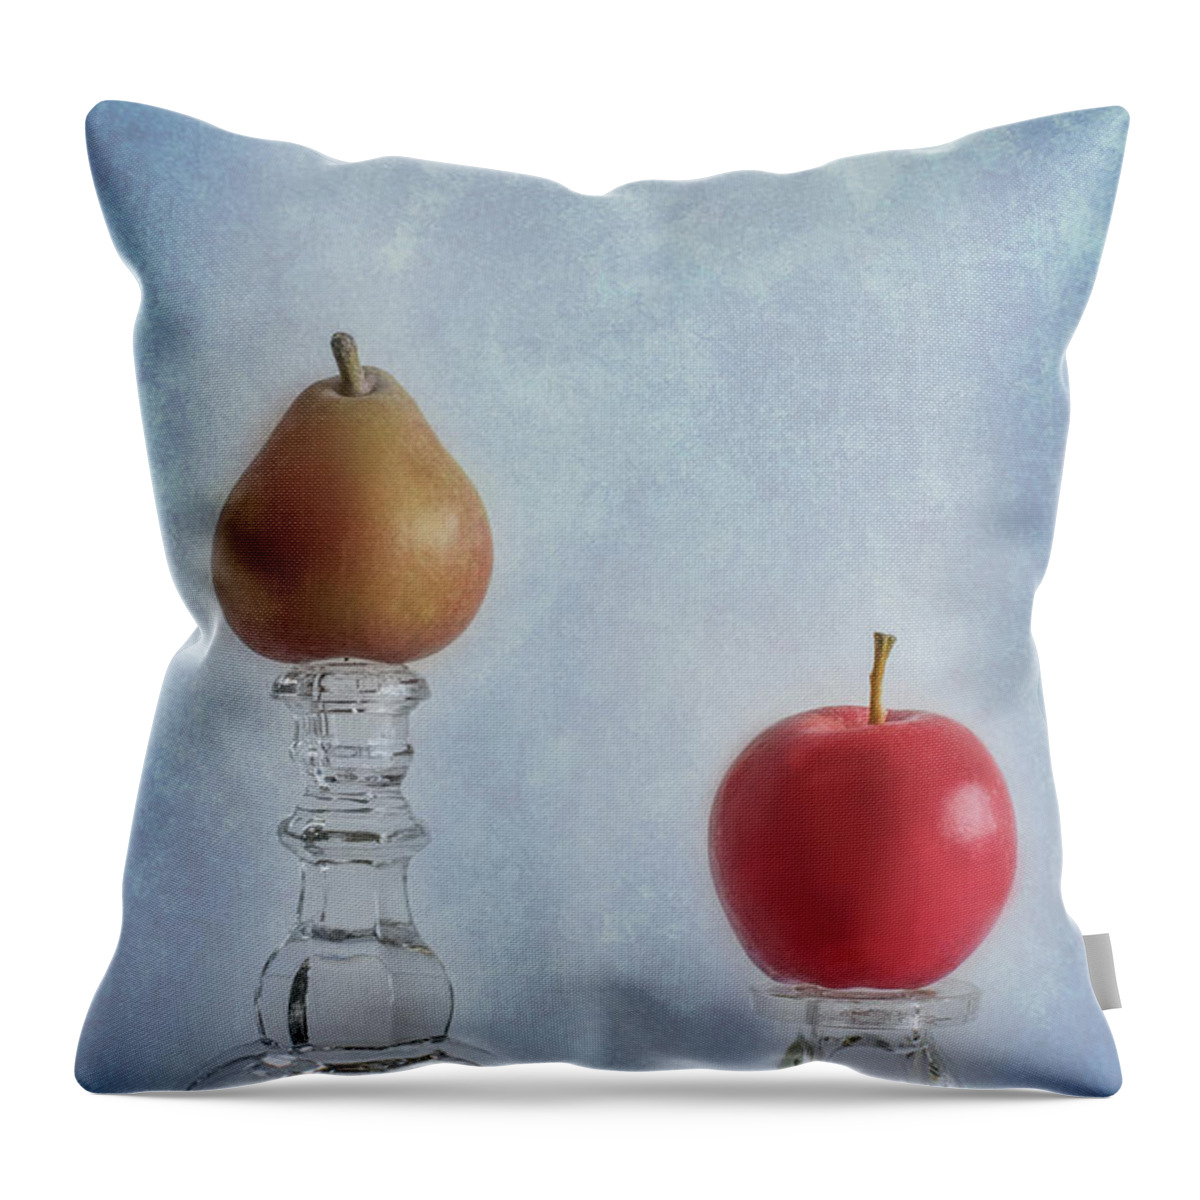 Fruit Throw Pillow featuring the photograph Apples to Pears by Elvira Pinkhas